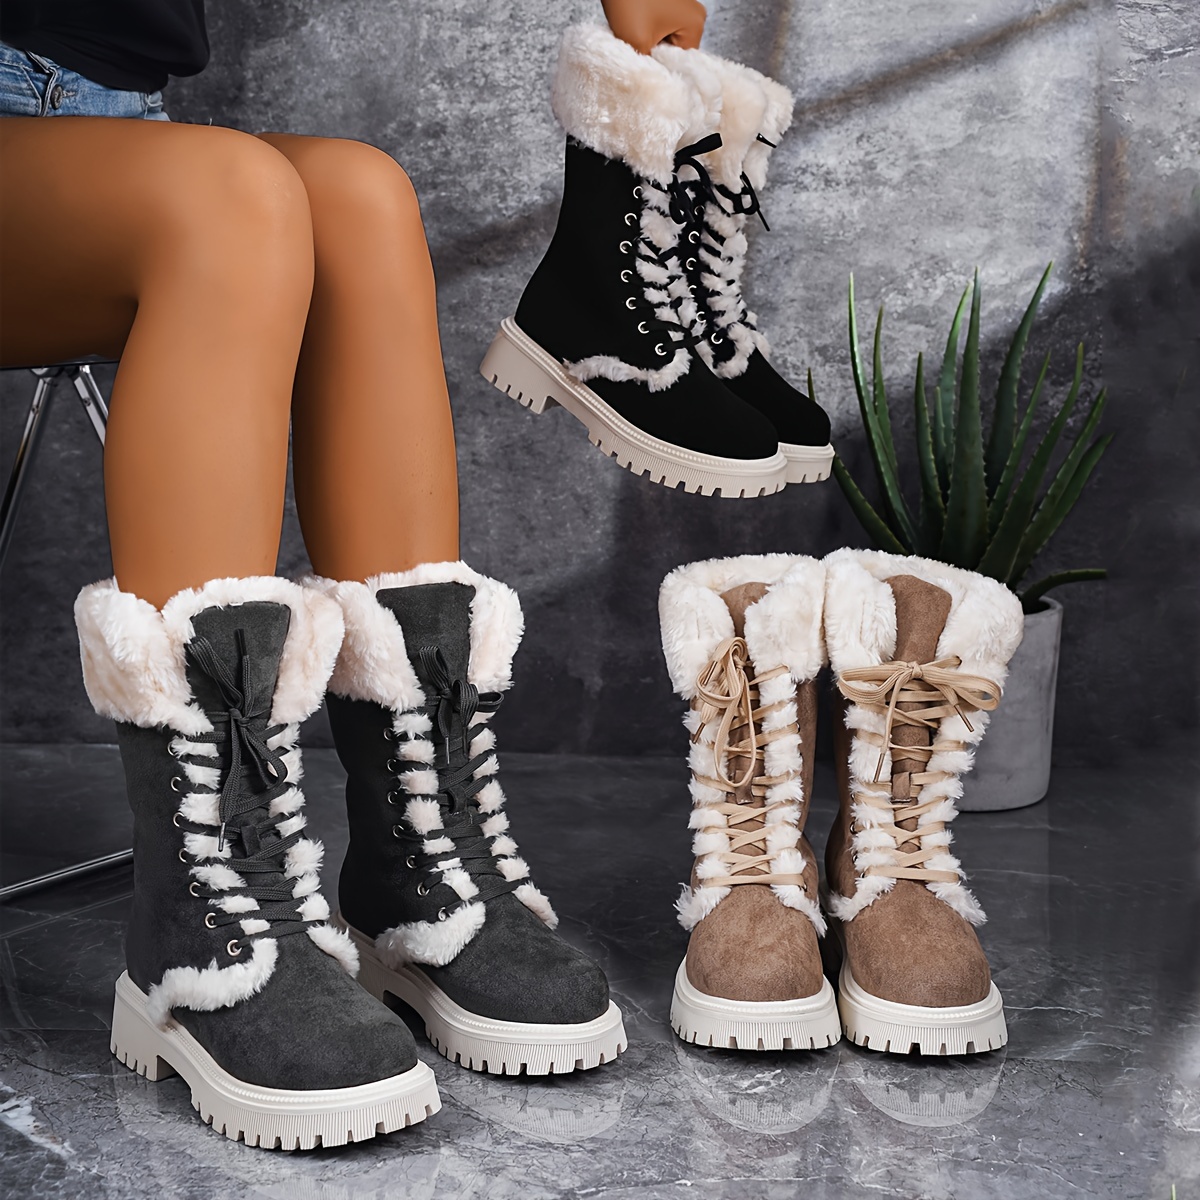 

Women's Fleece Lined Snow Boots, Winter Warm Lace Up Flat Mid Calf Boots, Thermal Outdoor Chunky Boots